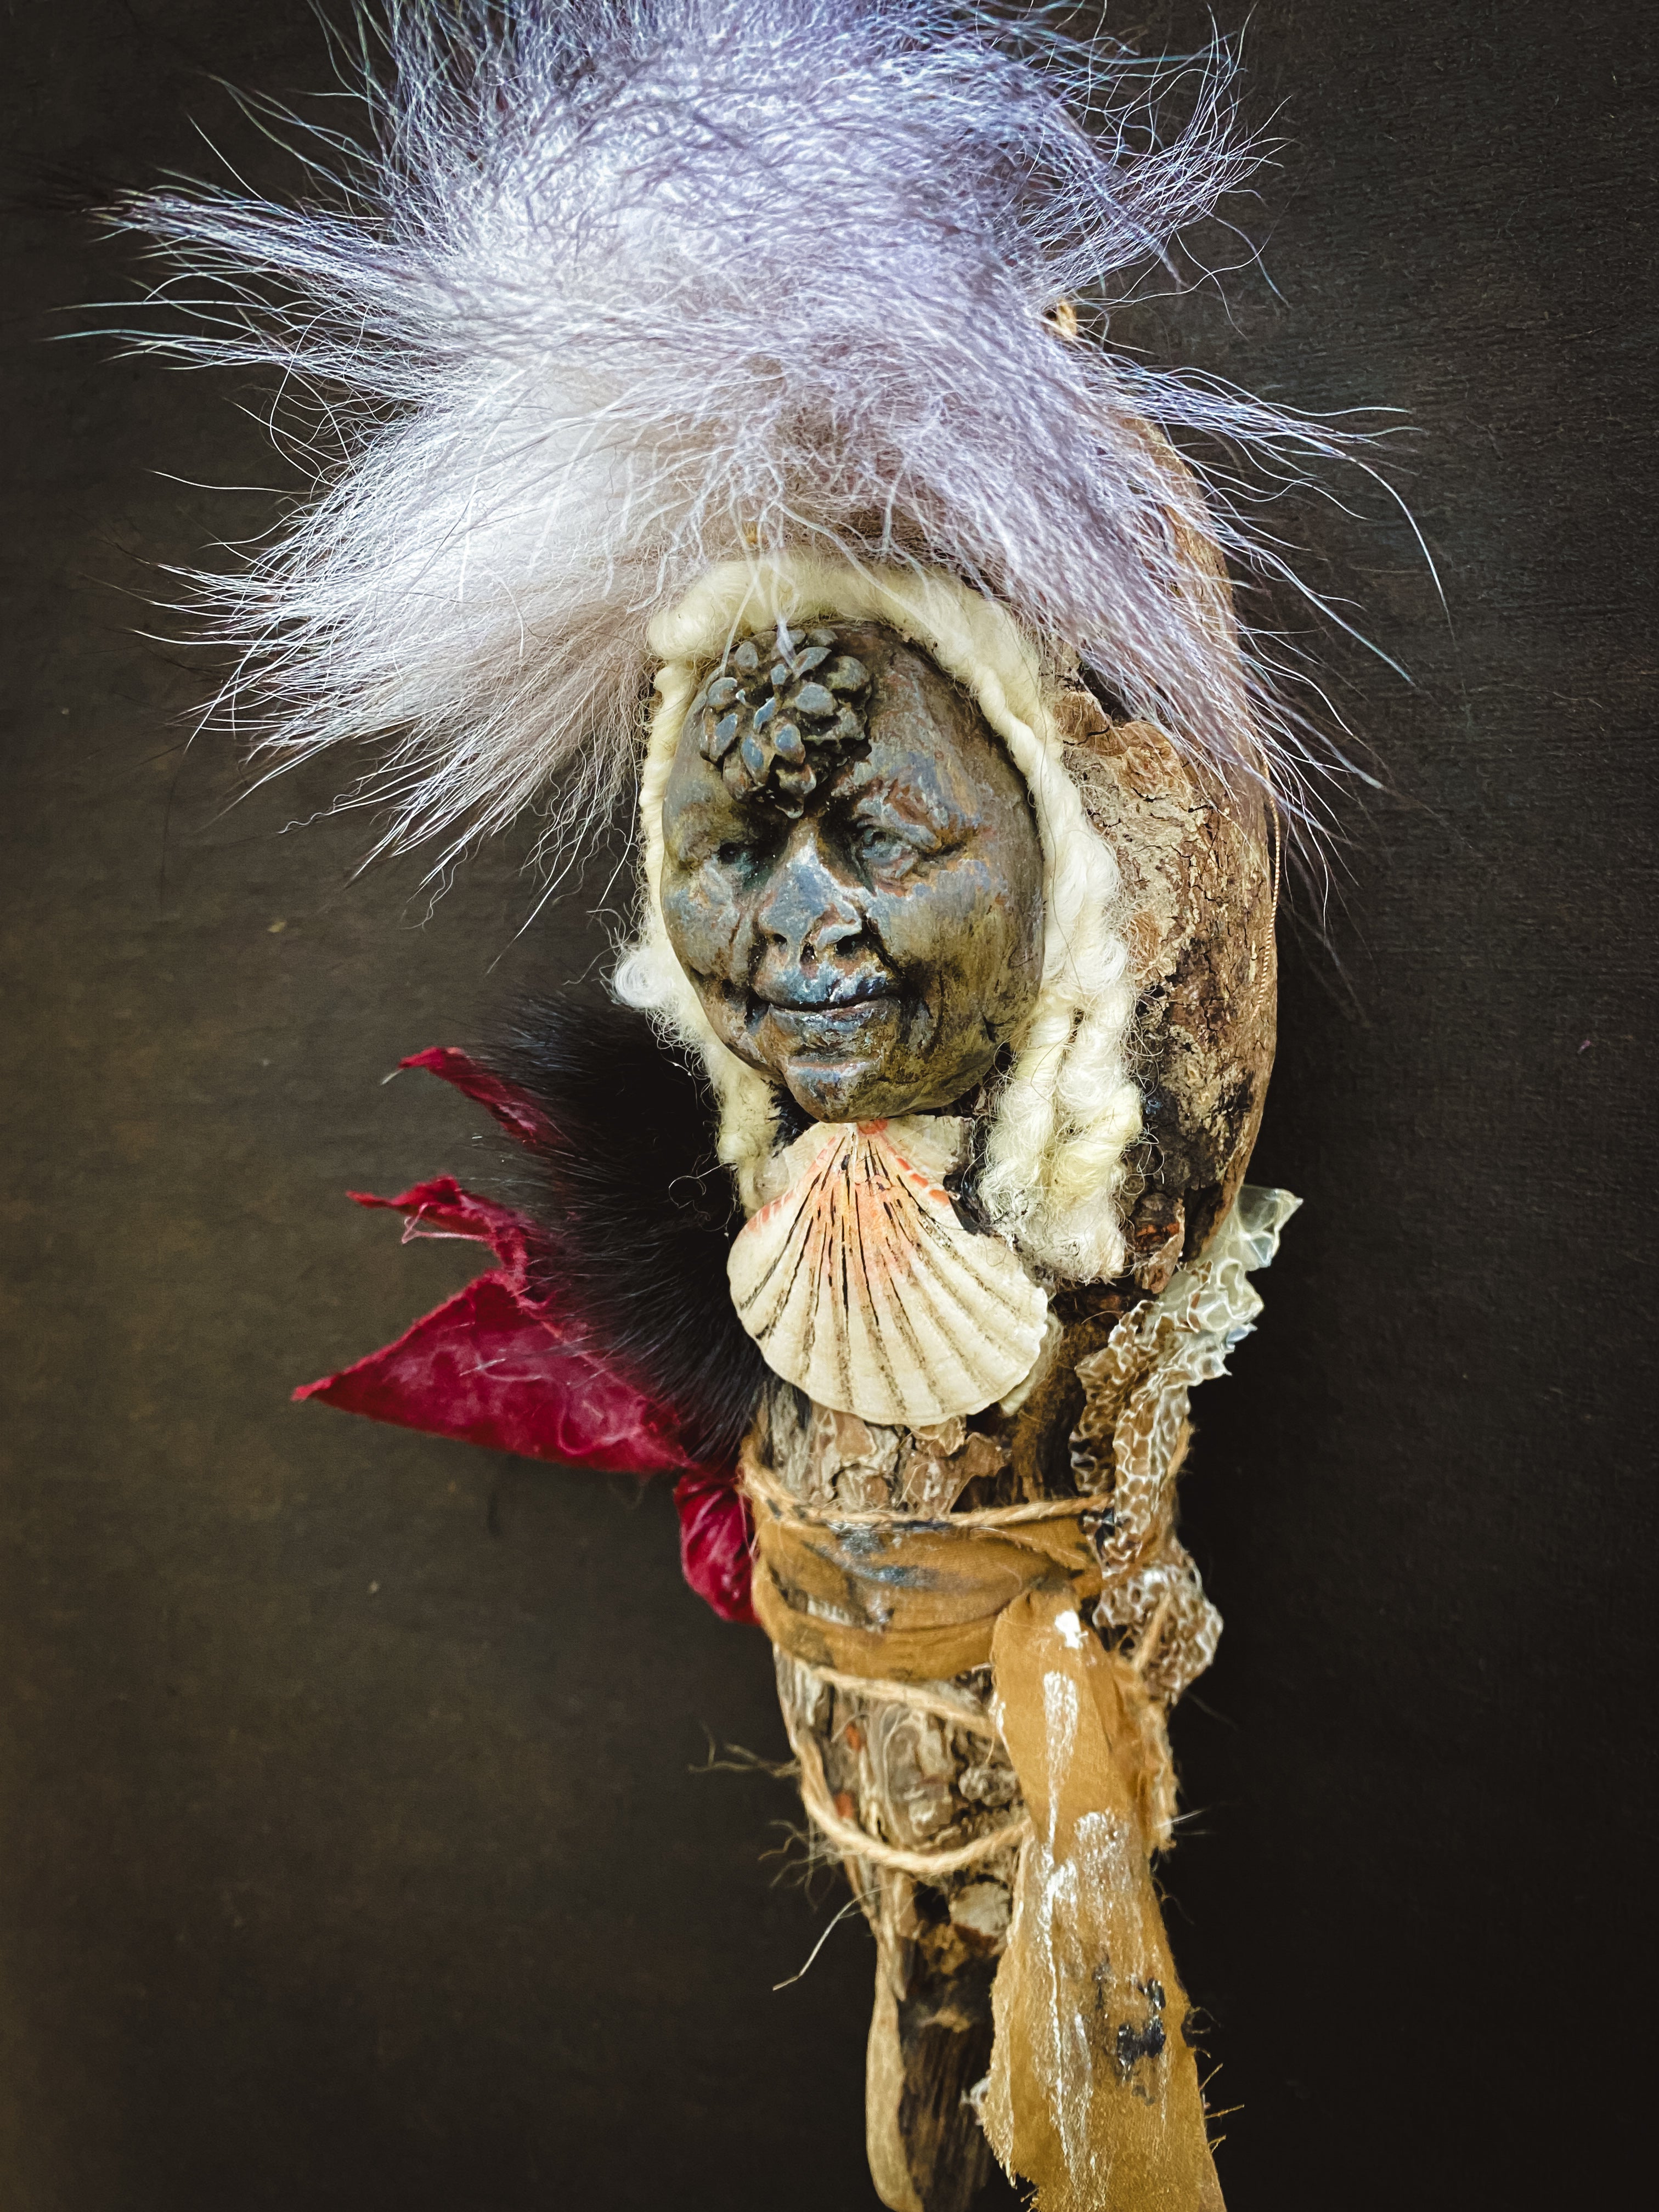 Nature Spirit Doll for Self-Love, Peace, Self-Confidence, Healthy Relationships + Openness - Medicine Doll - JuJu Doll